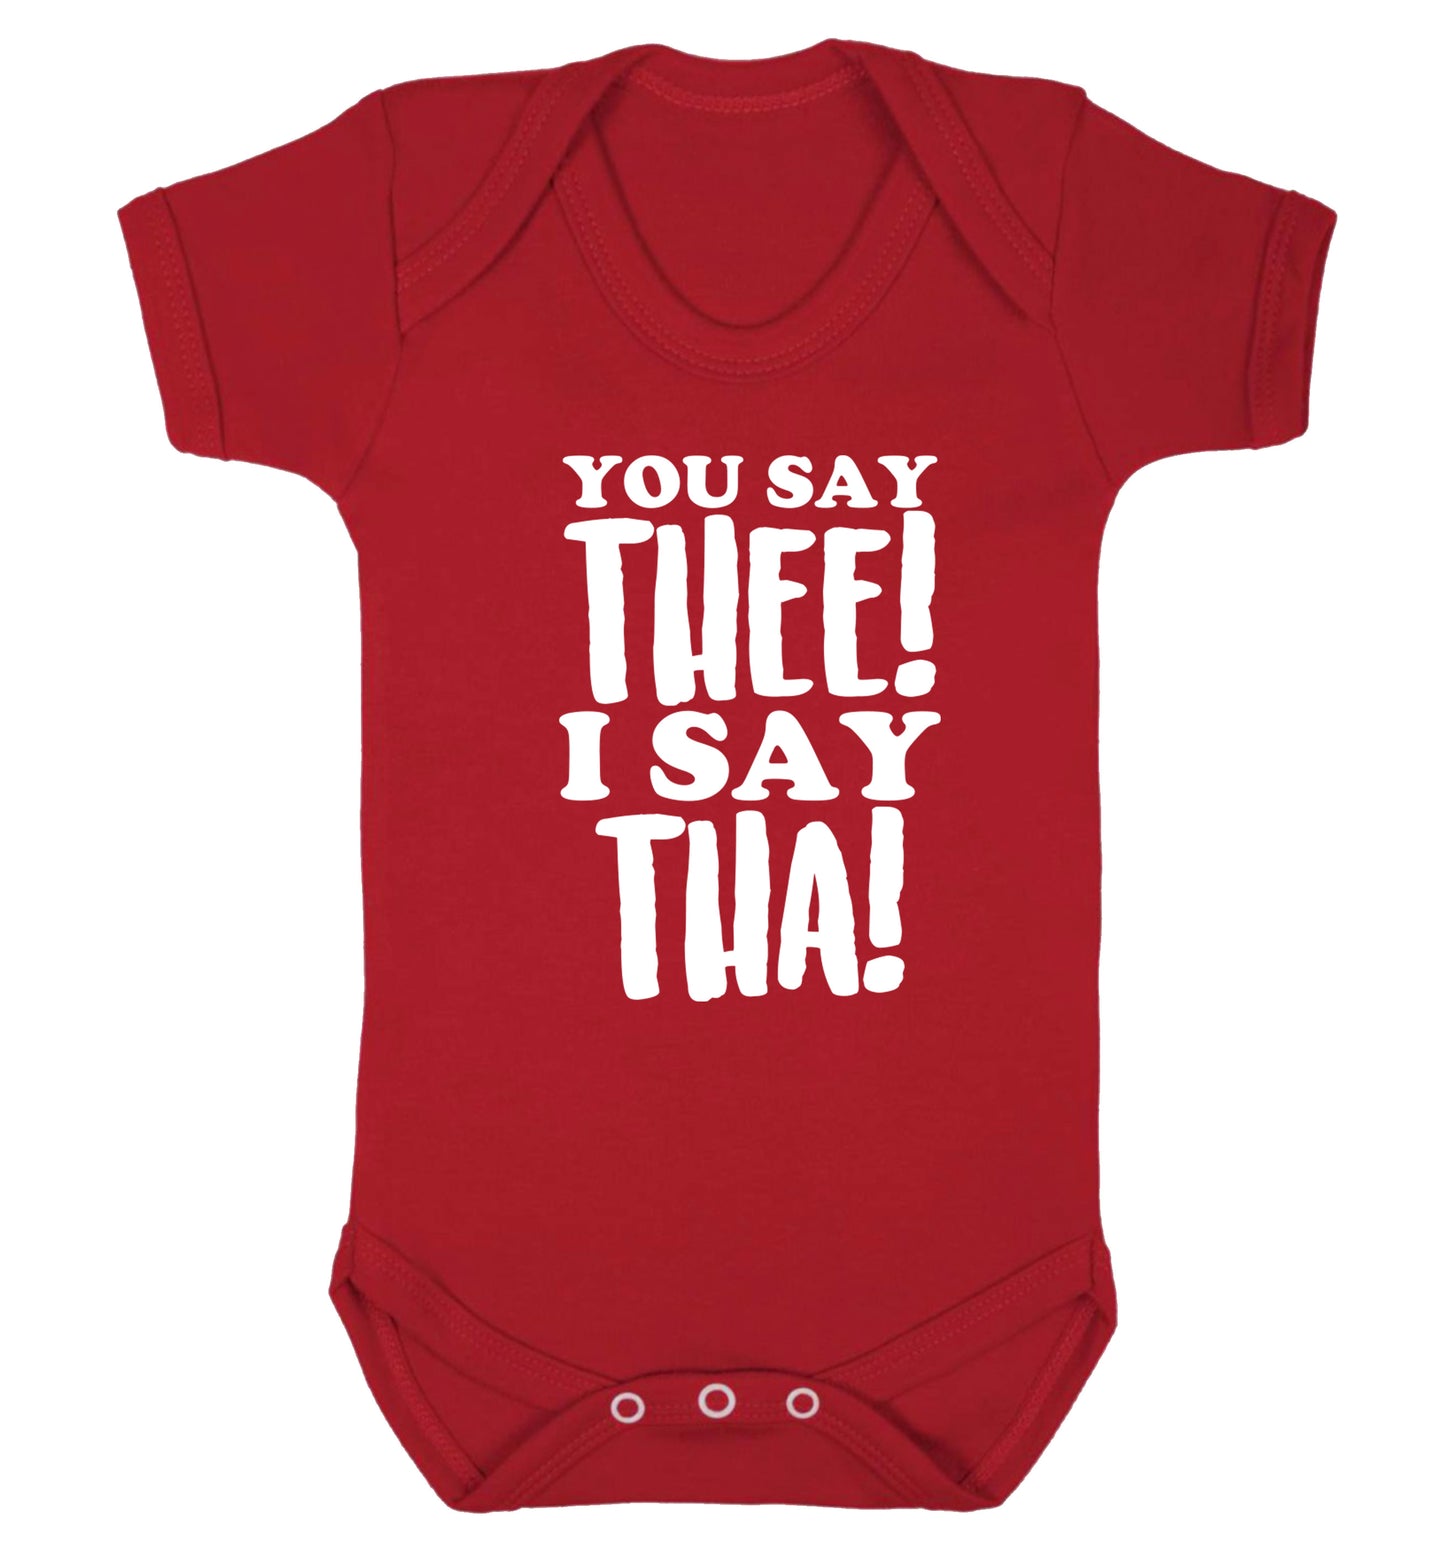 You say thee I say tha Baby Vest red 18-24 months